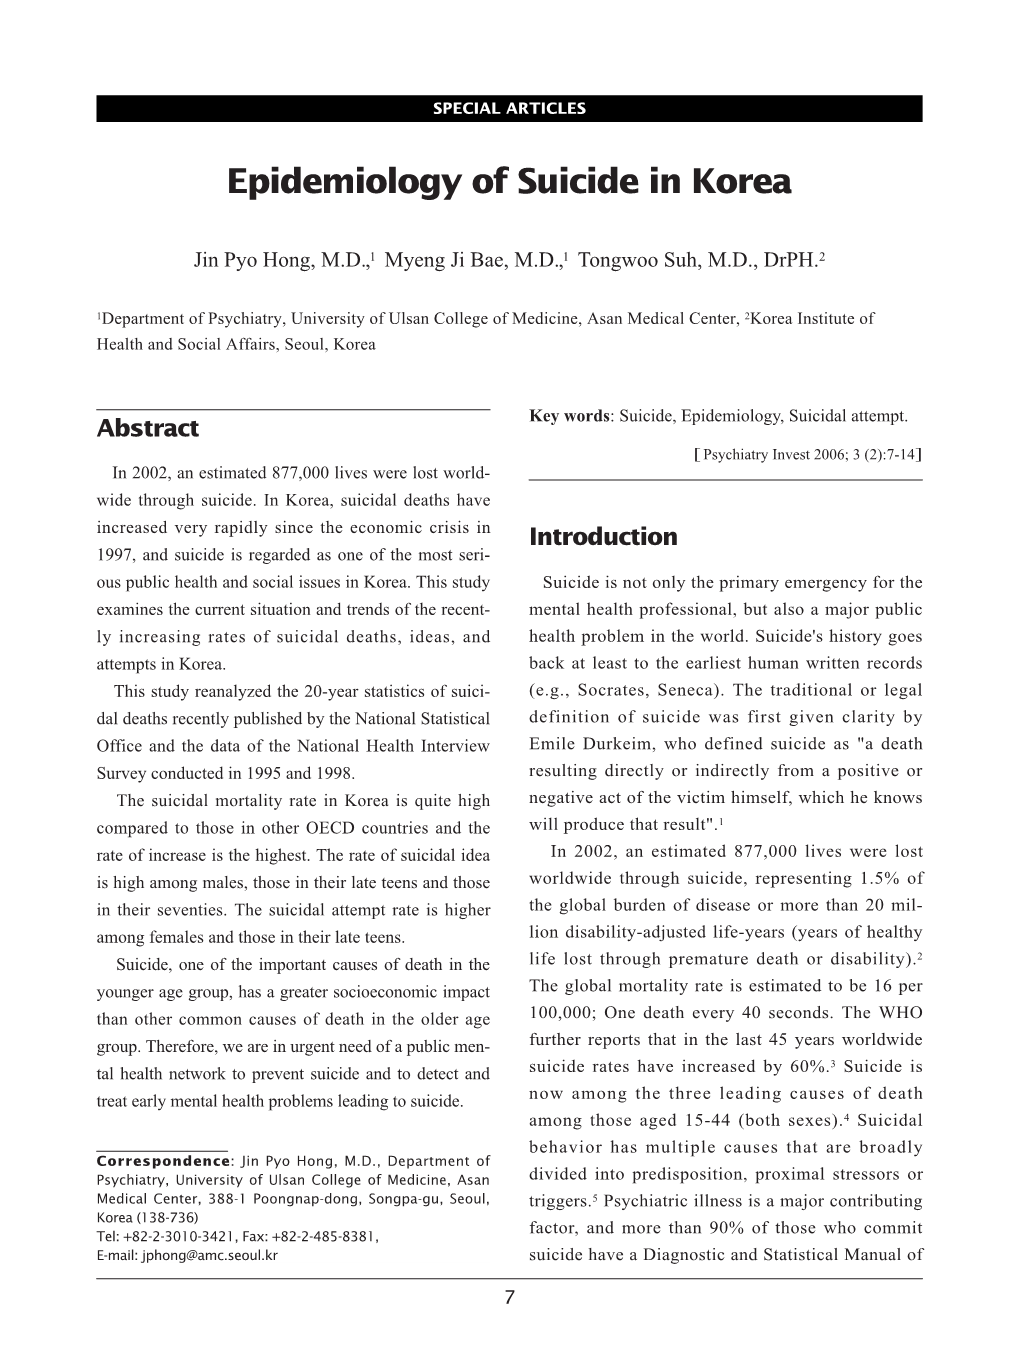 Epidemiology of Suicide in Korea